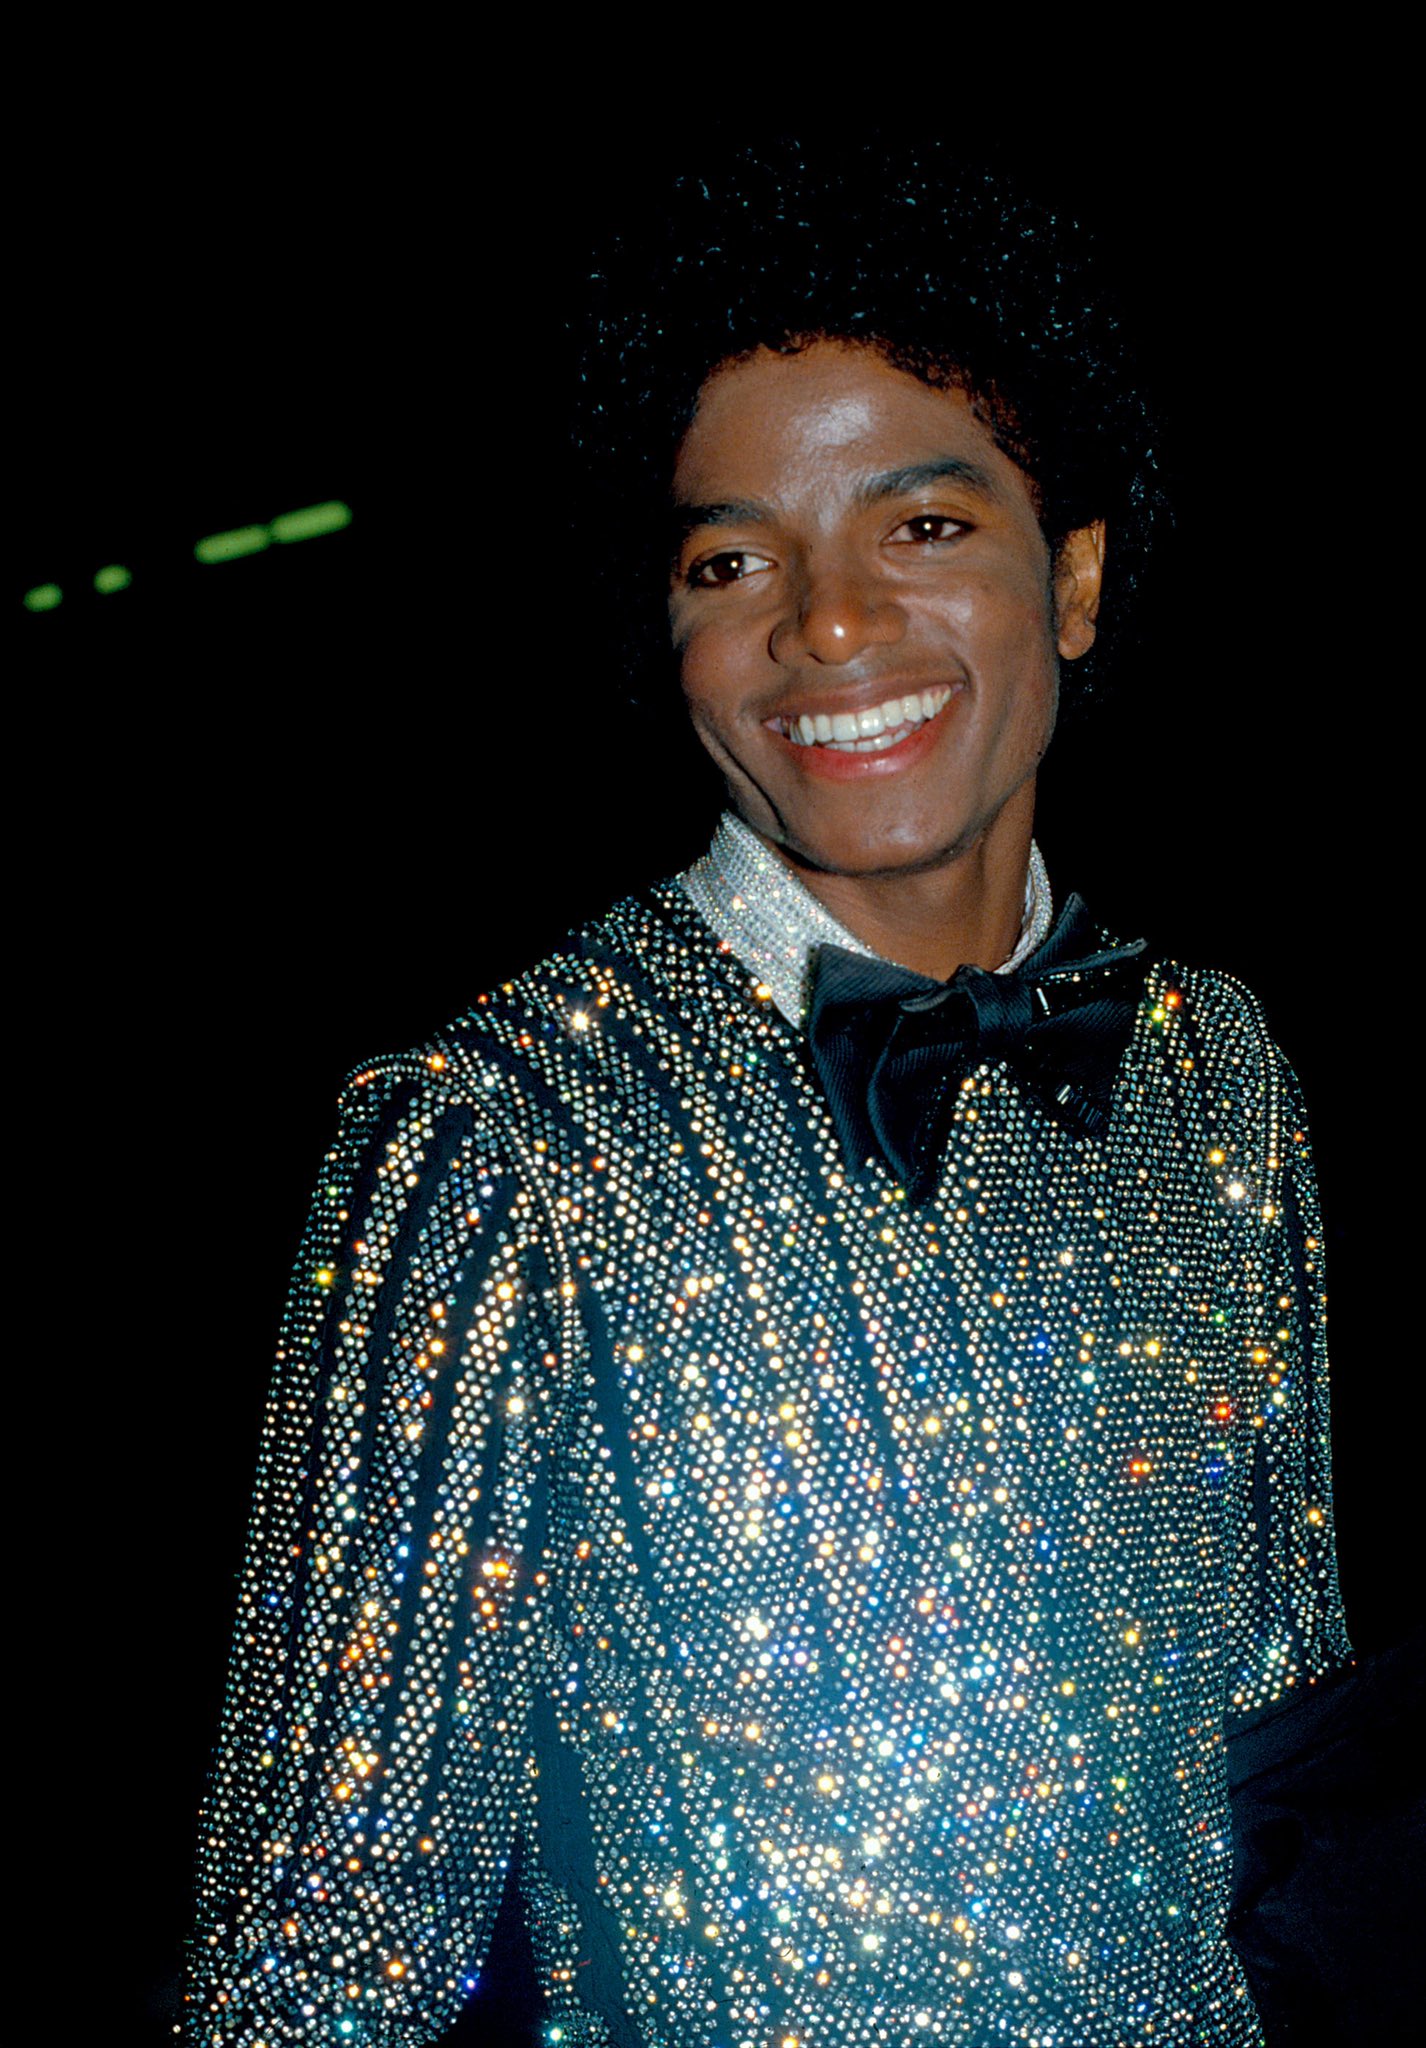 Happy heavenly birthday to the true king of pop, rock, and soul, Michael Jackson. 